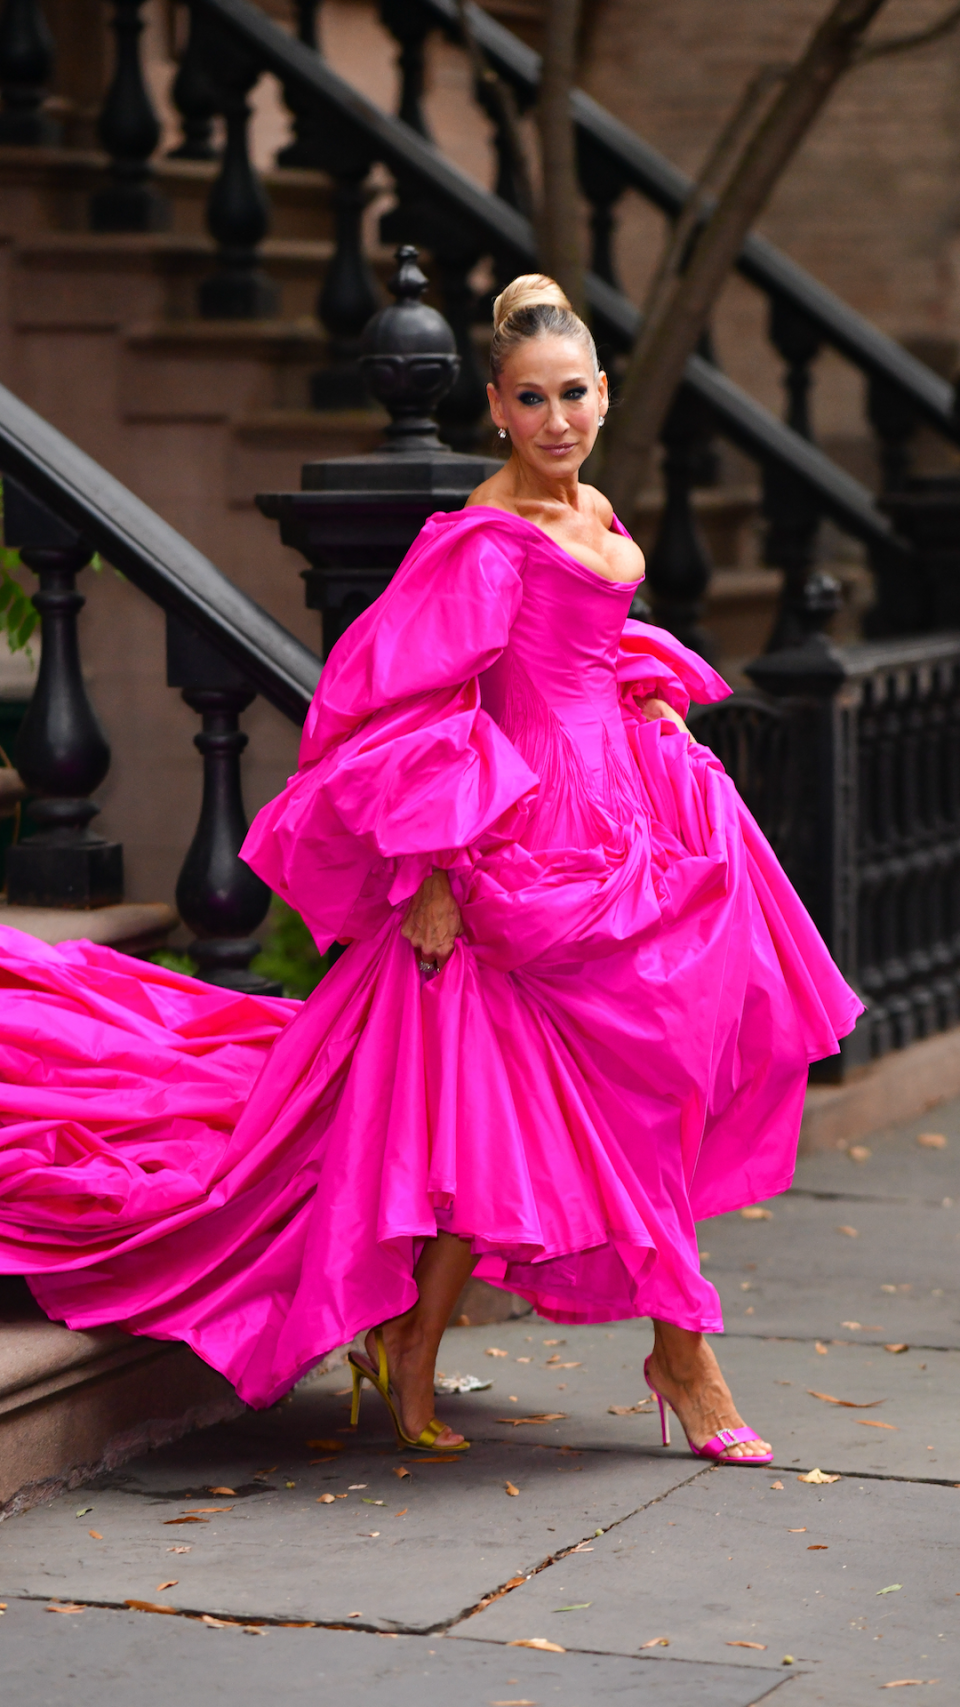 The sweeping pink gown